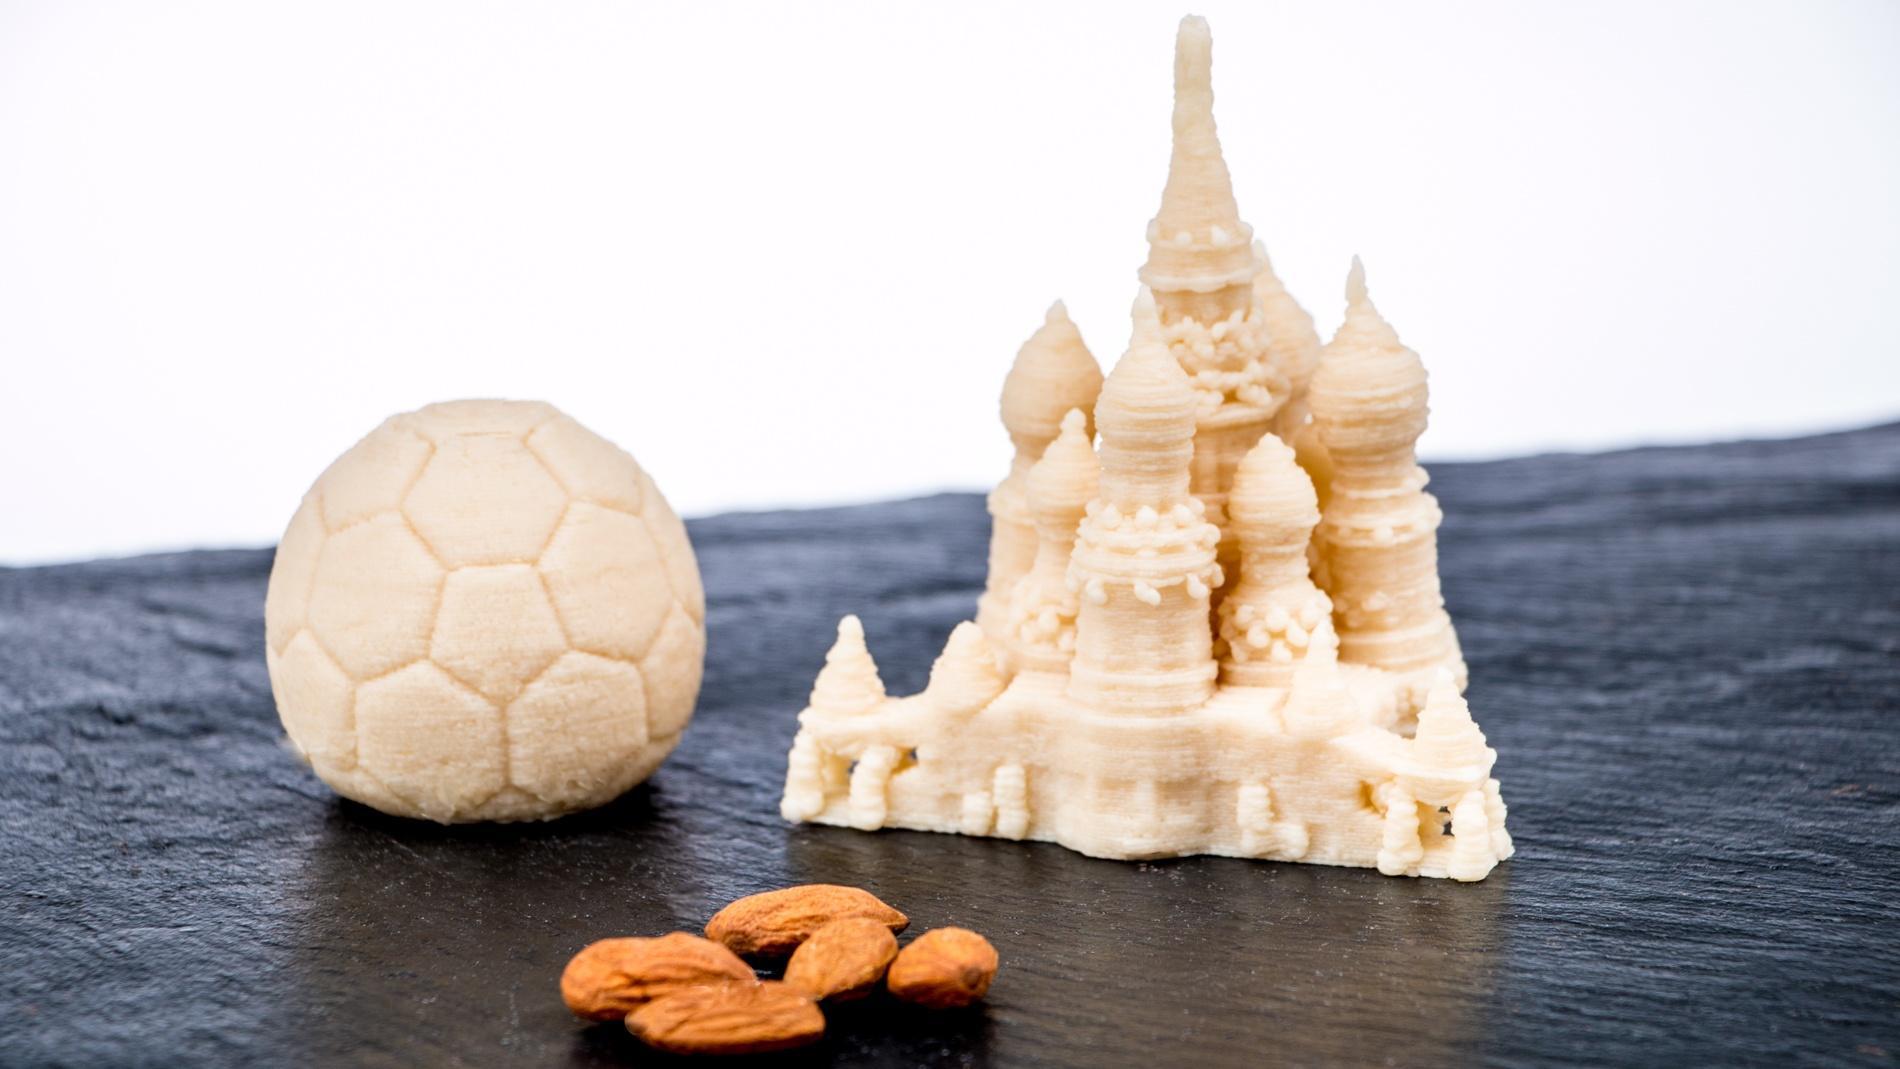 Moisture analysis of 3D printed food materials